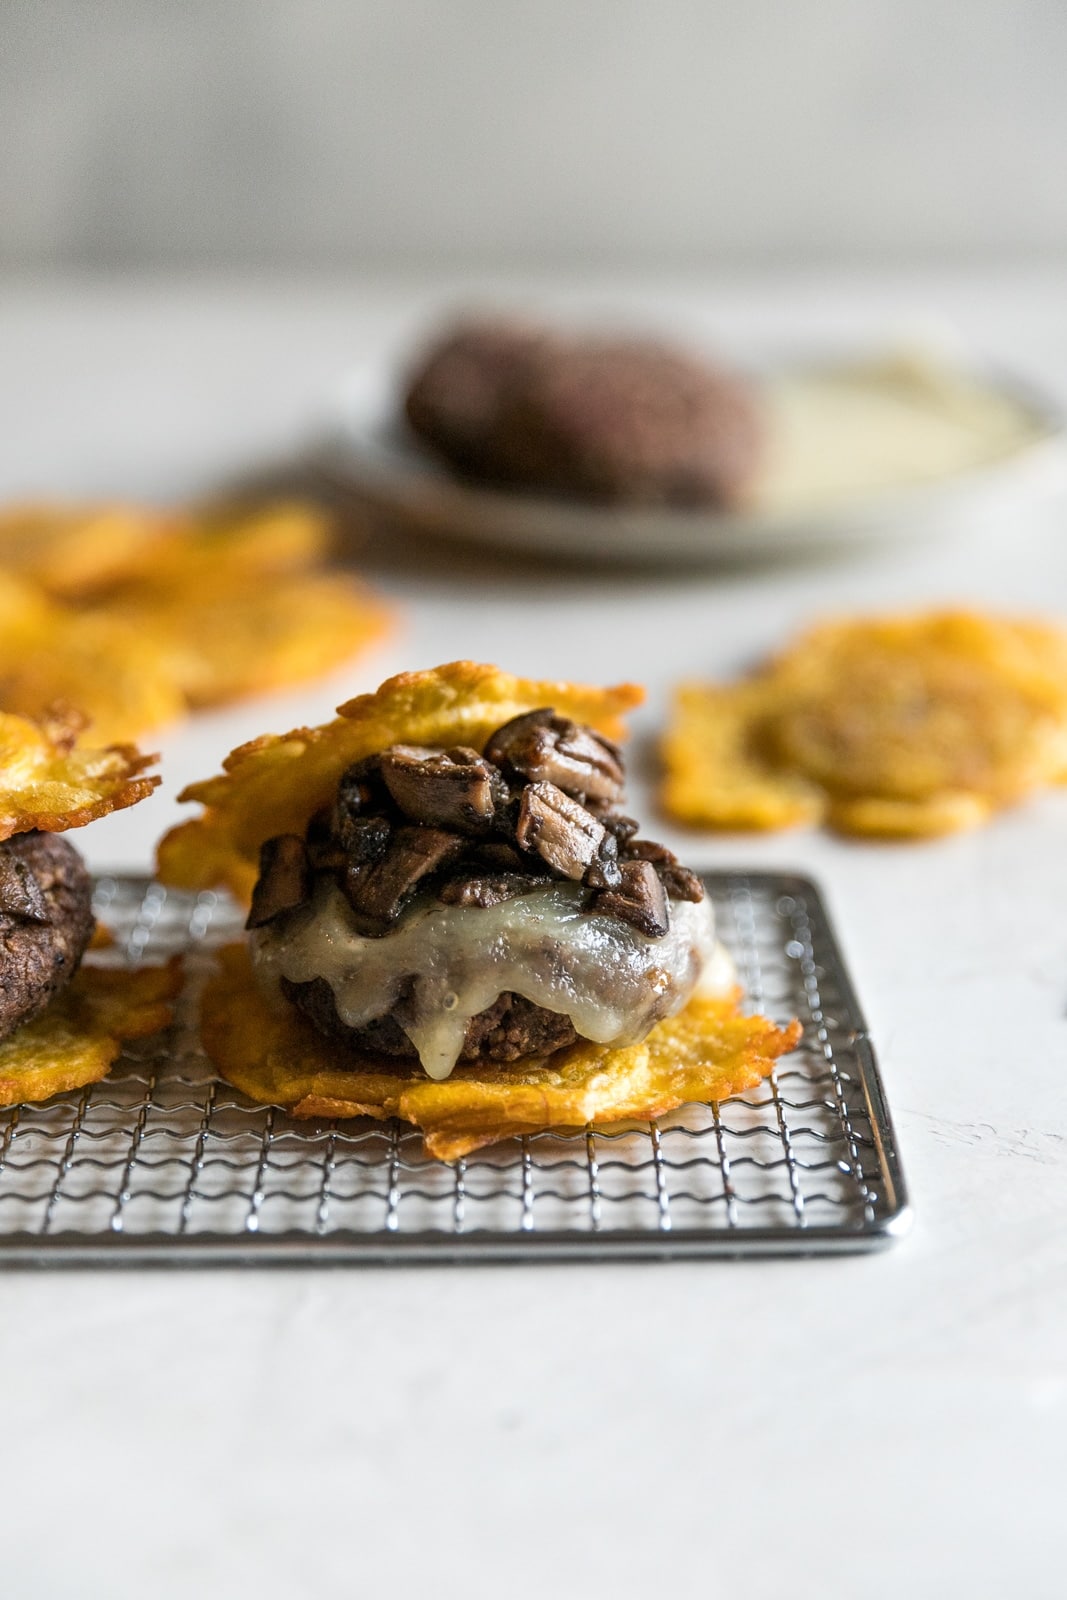 Flavorful black bean burgers topped with melted Swiss cheese and sautéed mushrooms with two twice fried plantains (tostones) as buns. A delicious Cuban twist on a veggie burger!